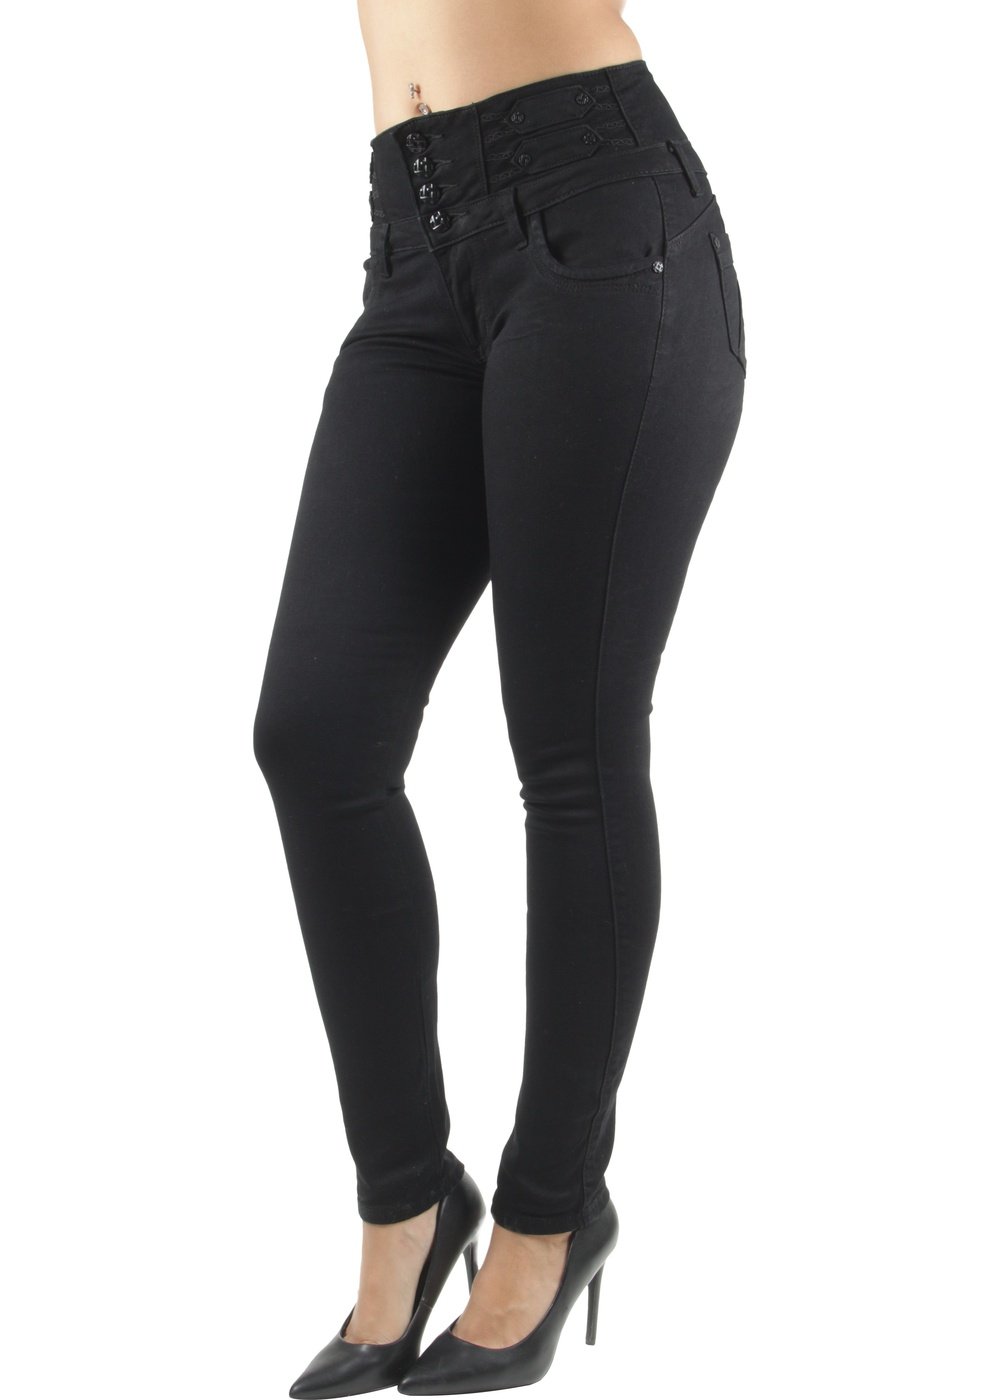 Waisted Butt Lifting Jeans for Women - Skinny Jeans Levanta Cola -Colombian  Pants Up